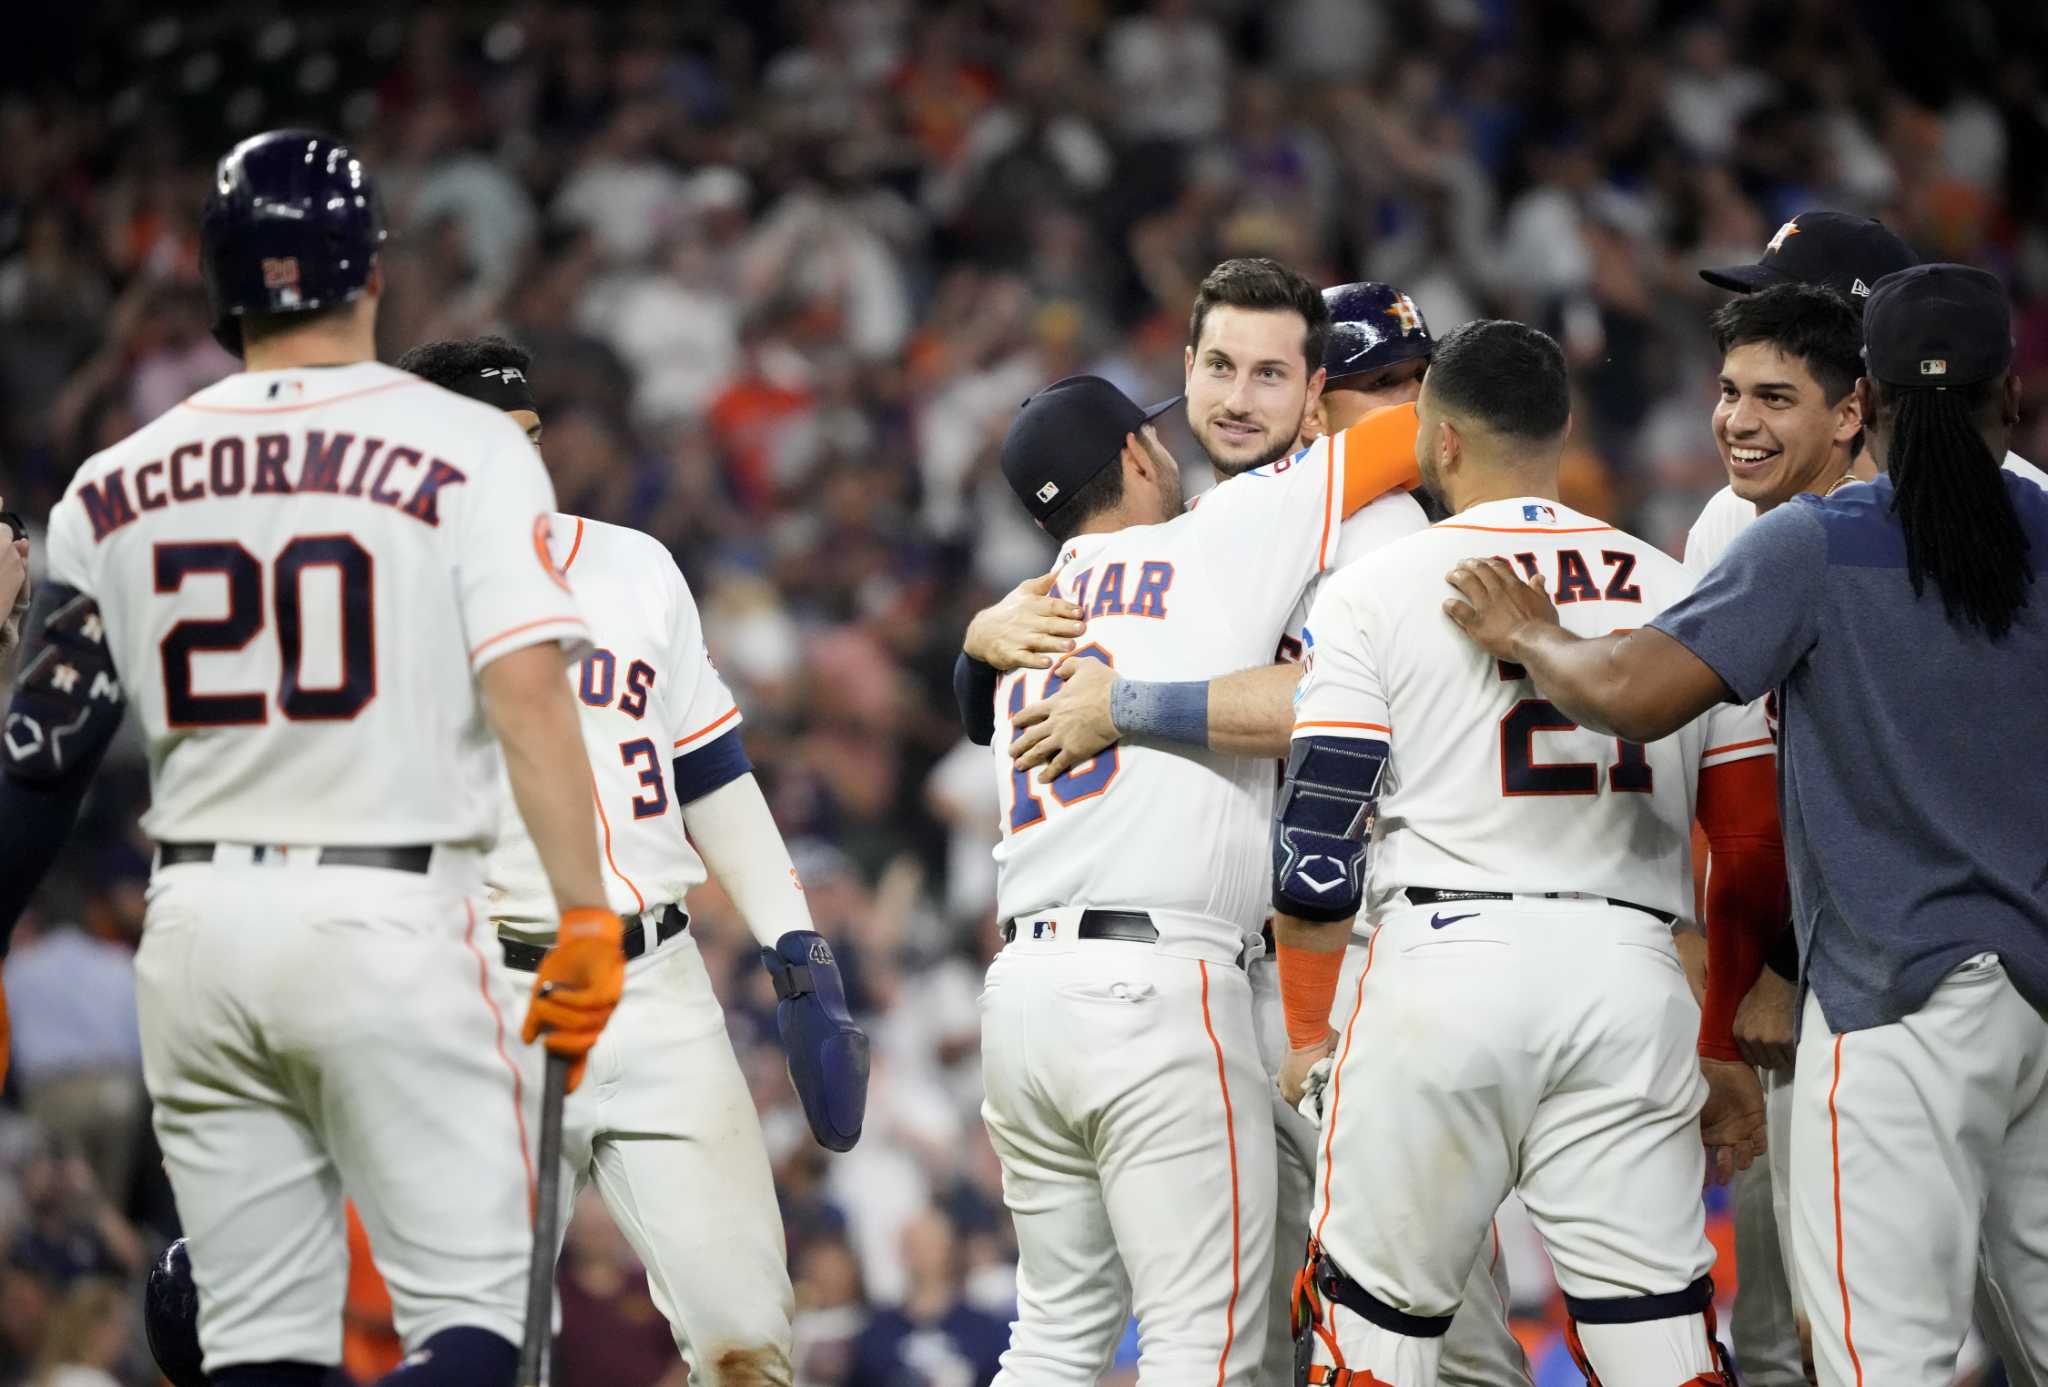 Altuve's 3-run homer in 9th caps Astros' rally past Yankees - The